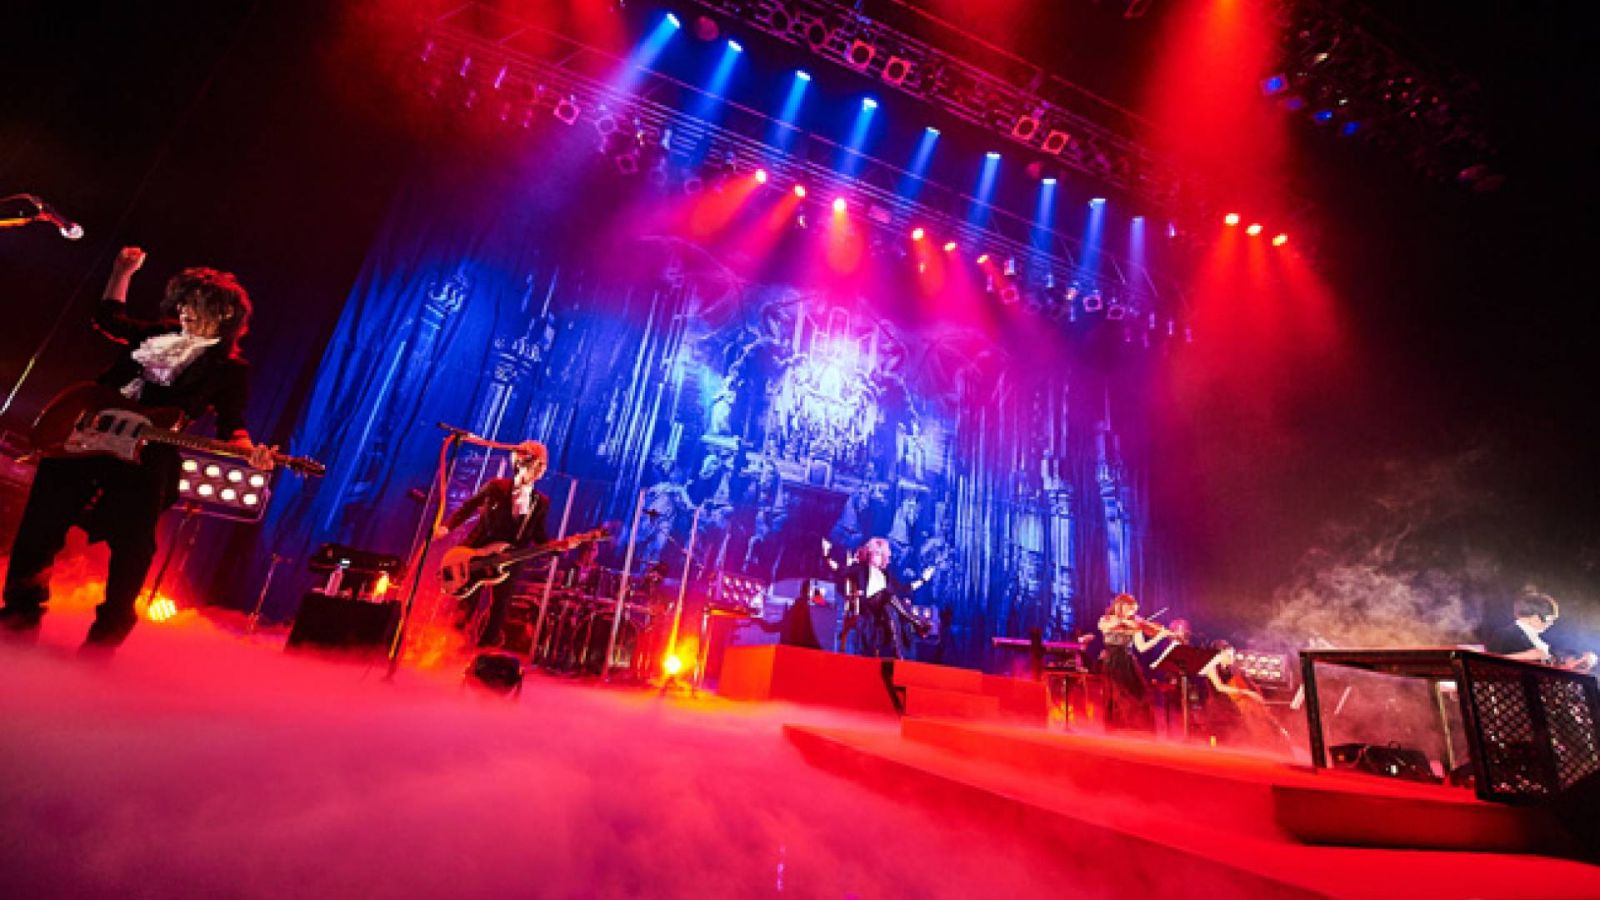 KAMIJO "Epic Rock Orchestra" w Zepp DiverCity © CHATEAU AGENCY. All rights reserved.